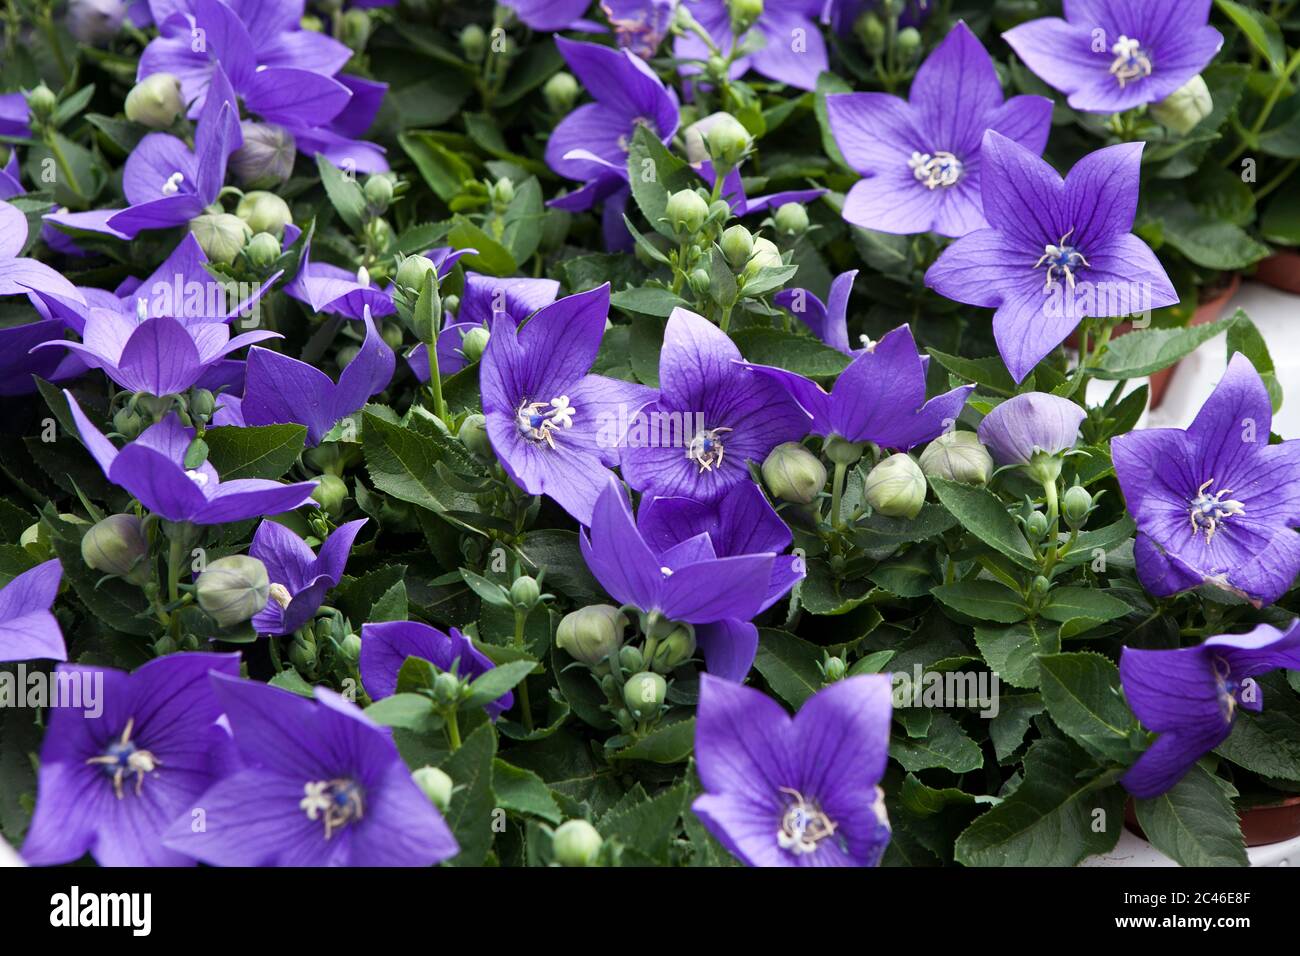 Campanula persicifolia ( Bellflower peach leaves , Campanula Persian or stick Jacob), purple bell flowers in summer garden. Background Stock Photo